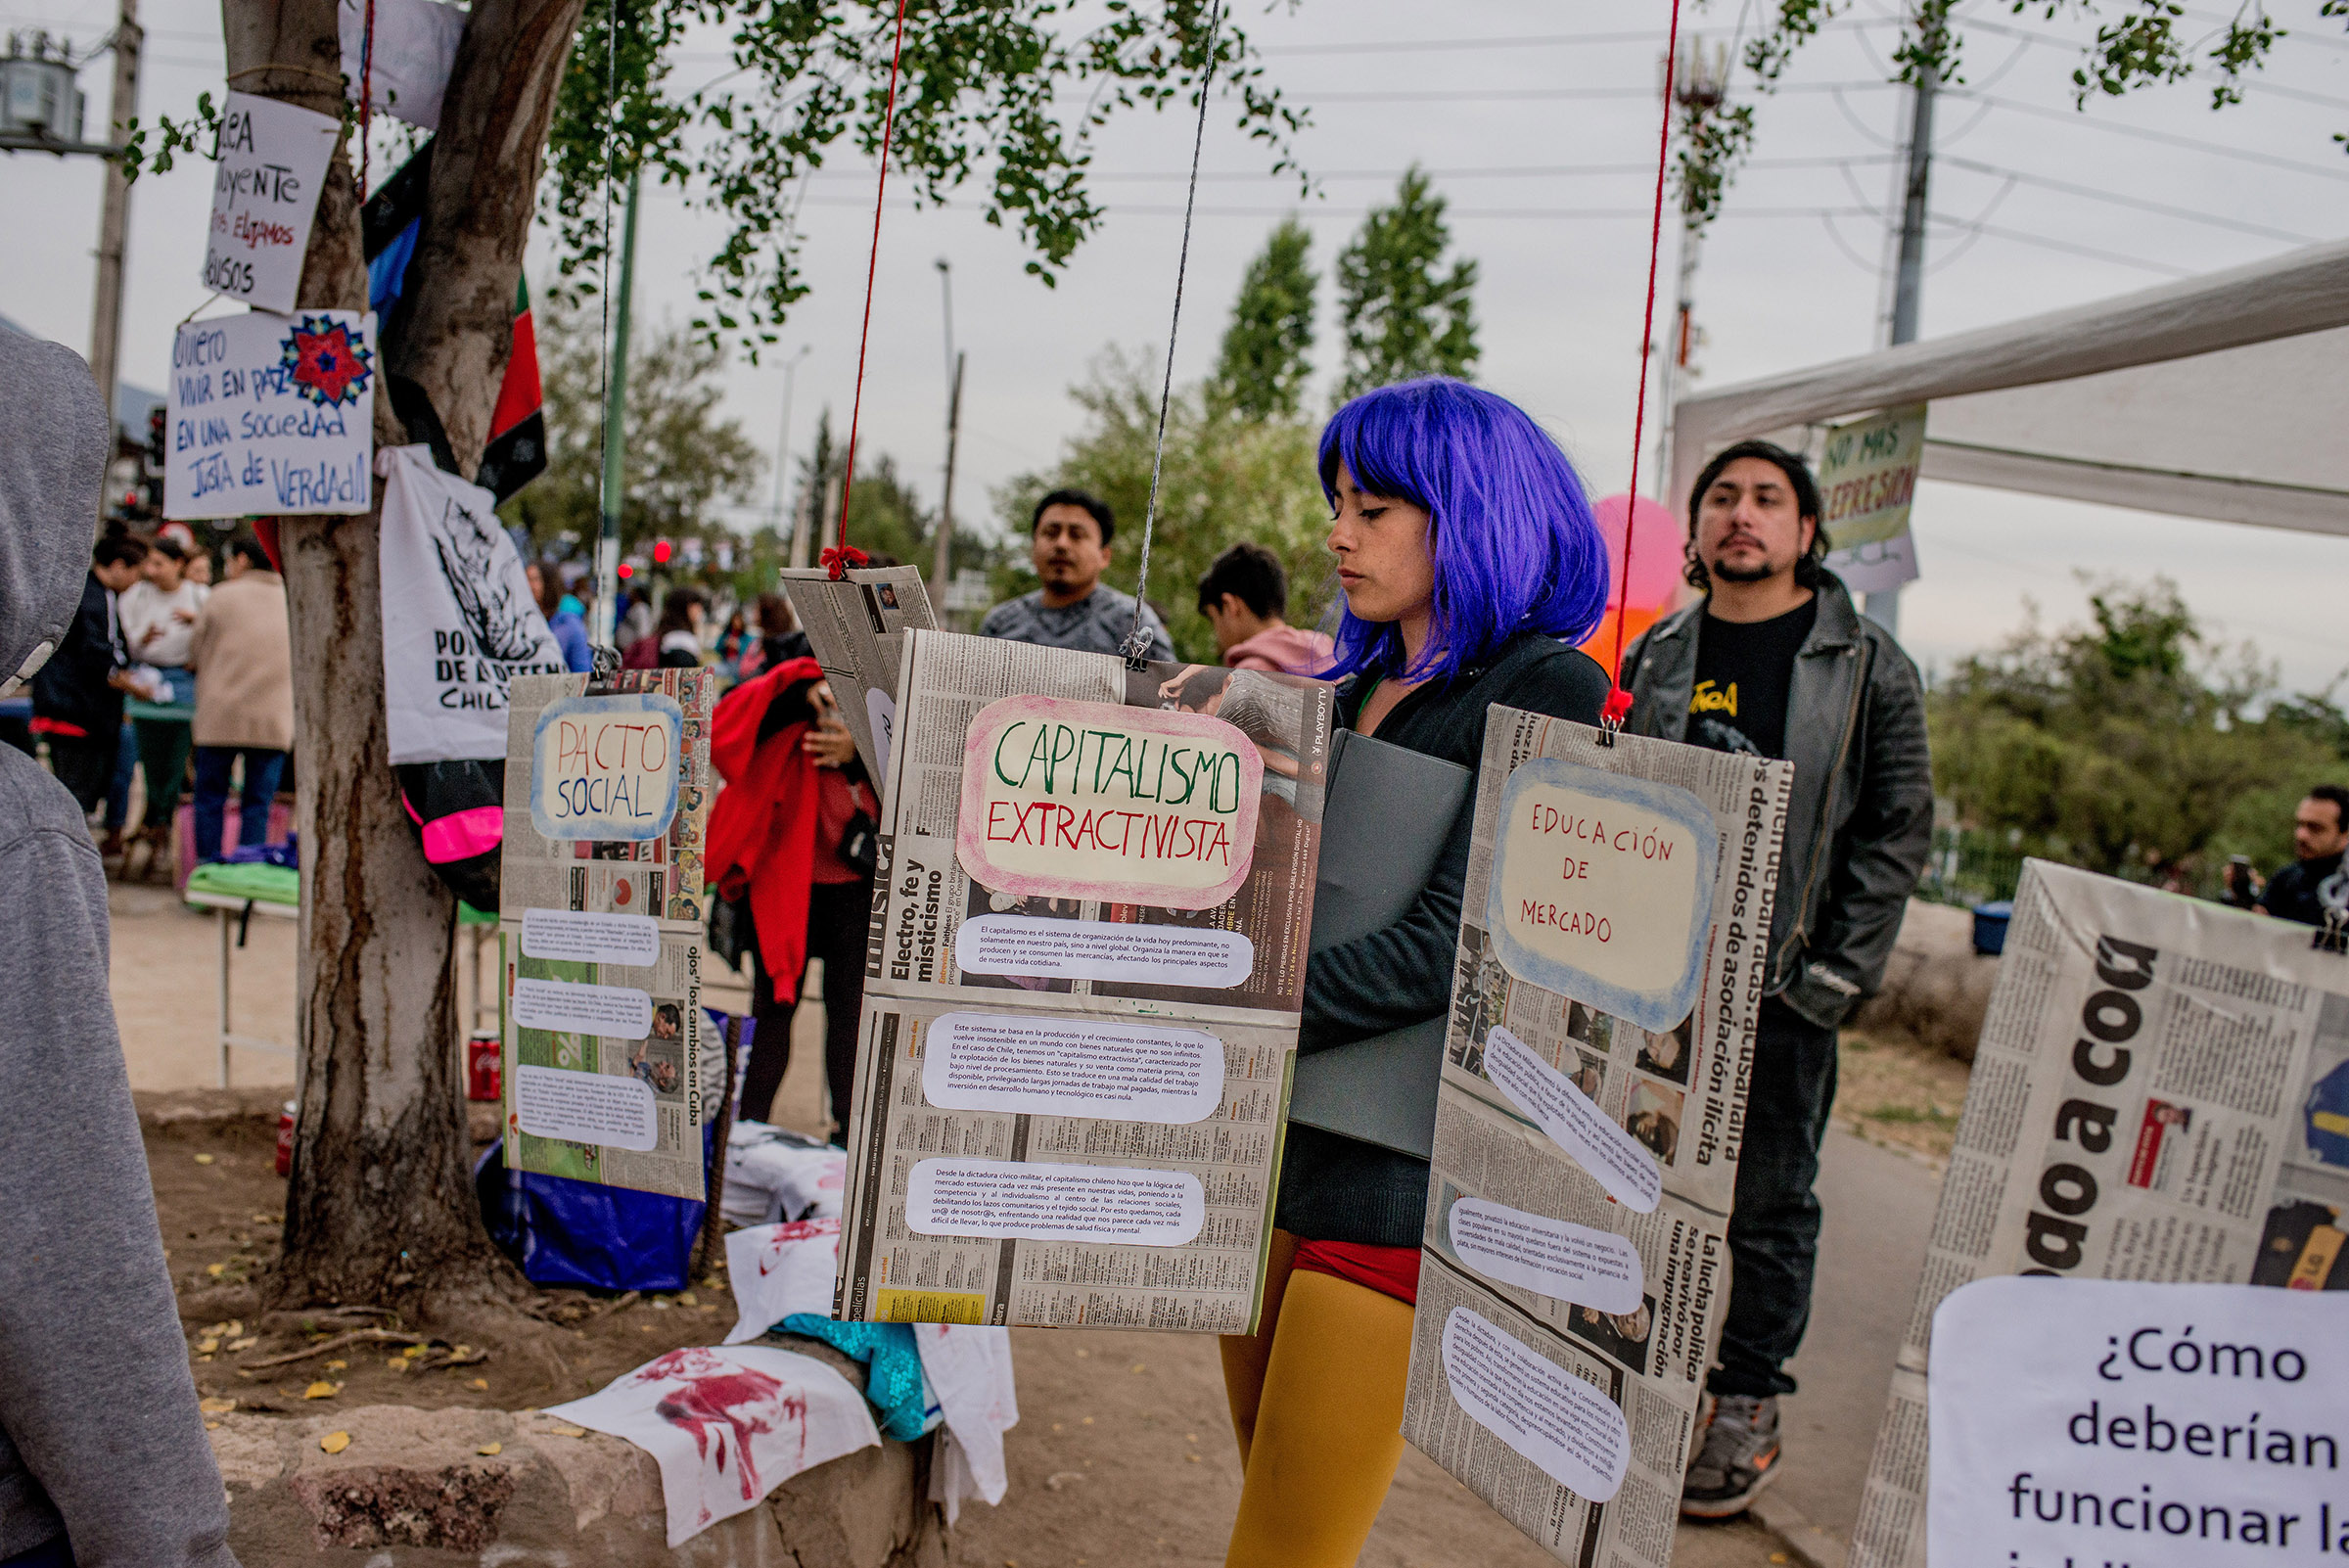 A gathering in Peñalolén, a neighborhood of Santiago, focuses on issues like education, economy and the Constitution, in Chile, on Oct. 27, 2019.